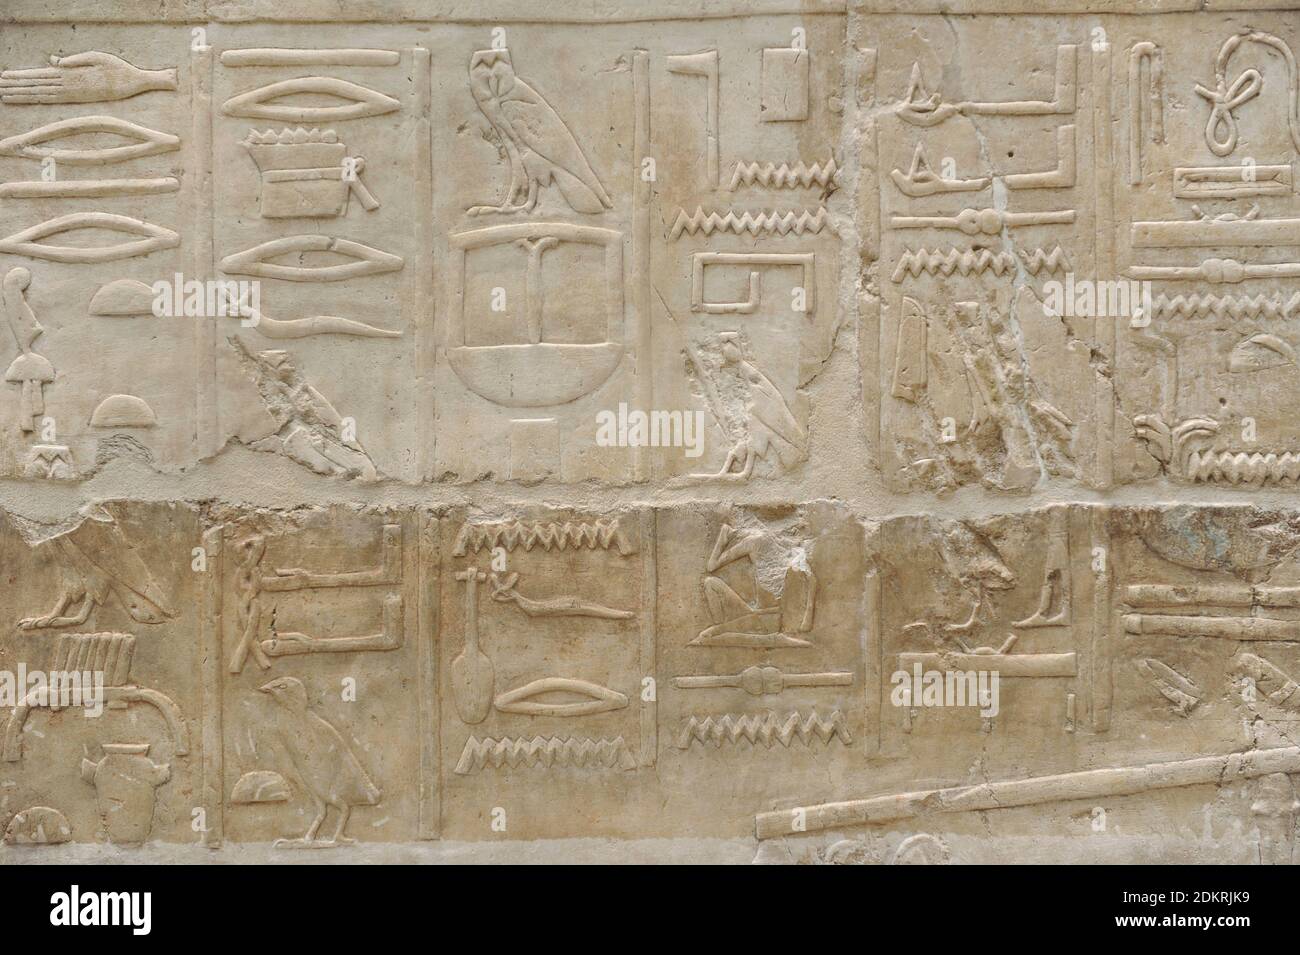 Relief depicting hieroglyphical scripture. Sandstone. New Kingdom. 18th Dynasty. 1479-1458 BC. From the Temple of Queen Hatshepsut. Deir el-Bahari, Egypt. Neues Museum. Berlin, Germany. Stock Photo